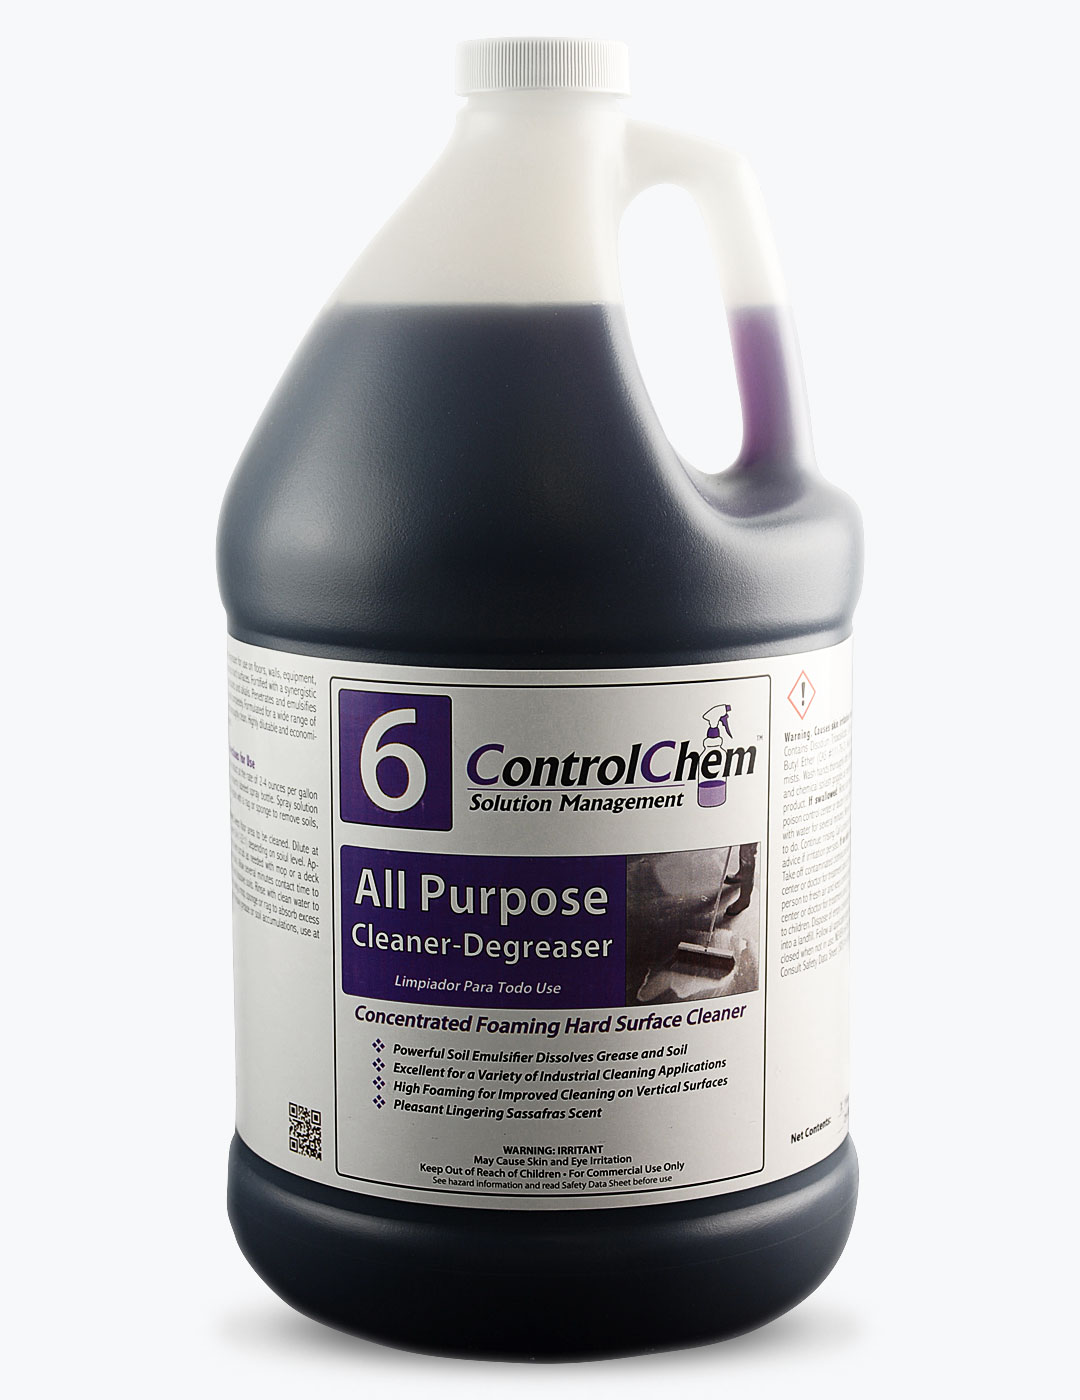 ControlChem #6 All Purpose Cleaner-Degreaser